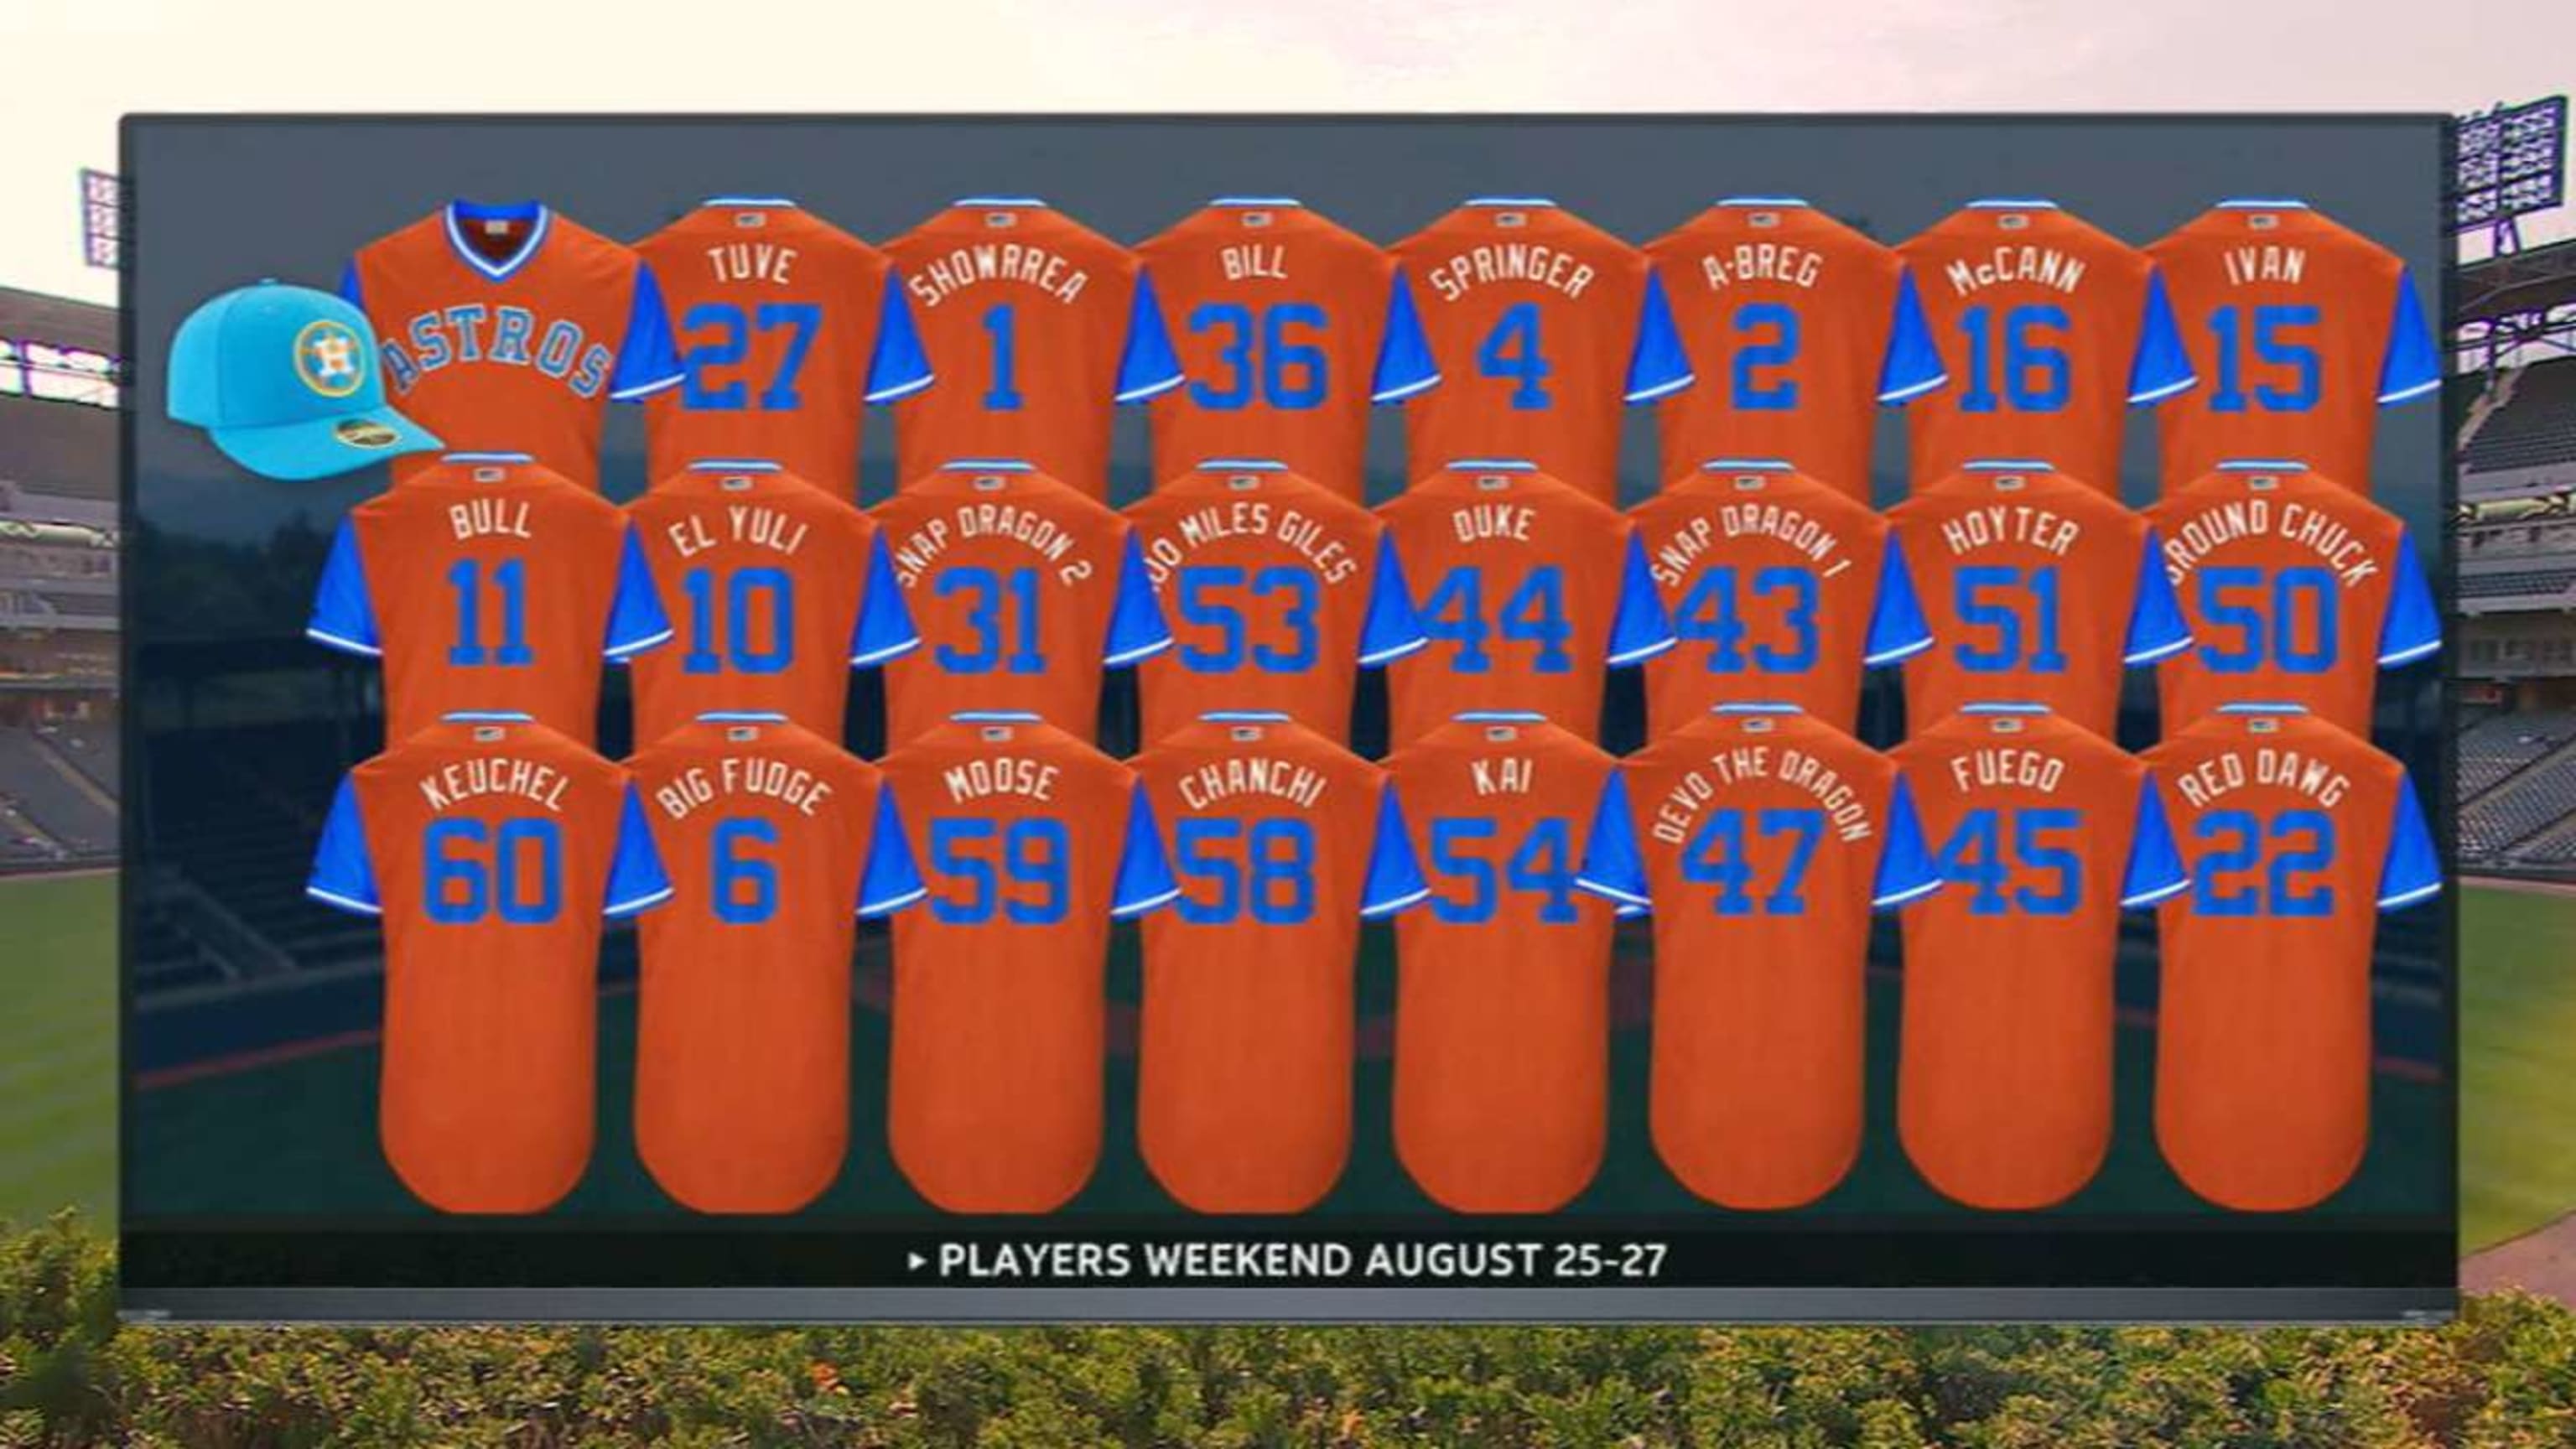 Houston Astros to celebrate Players Weekend